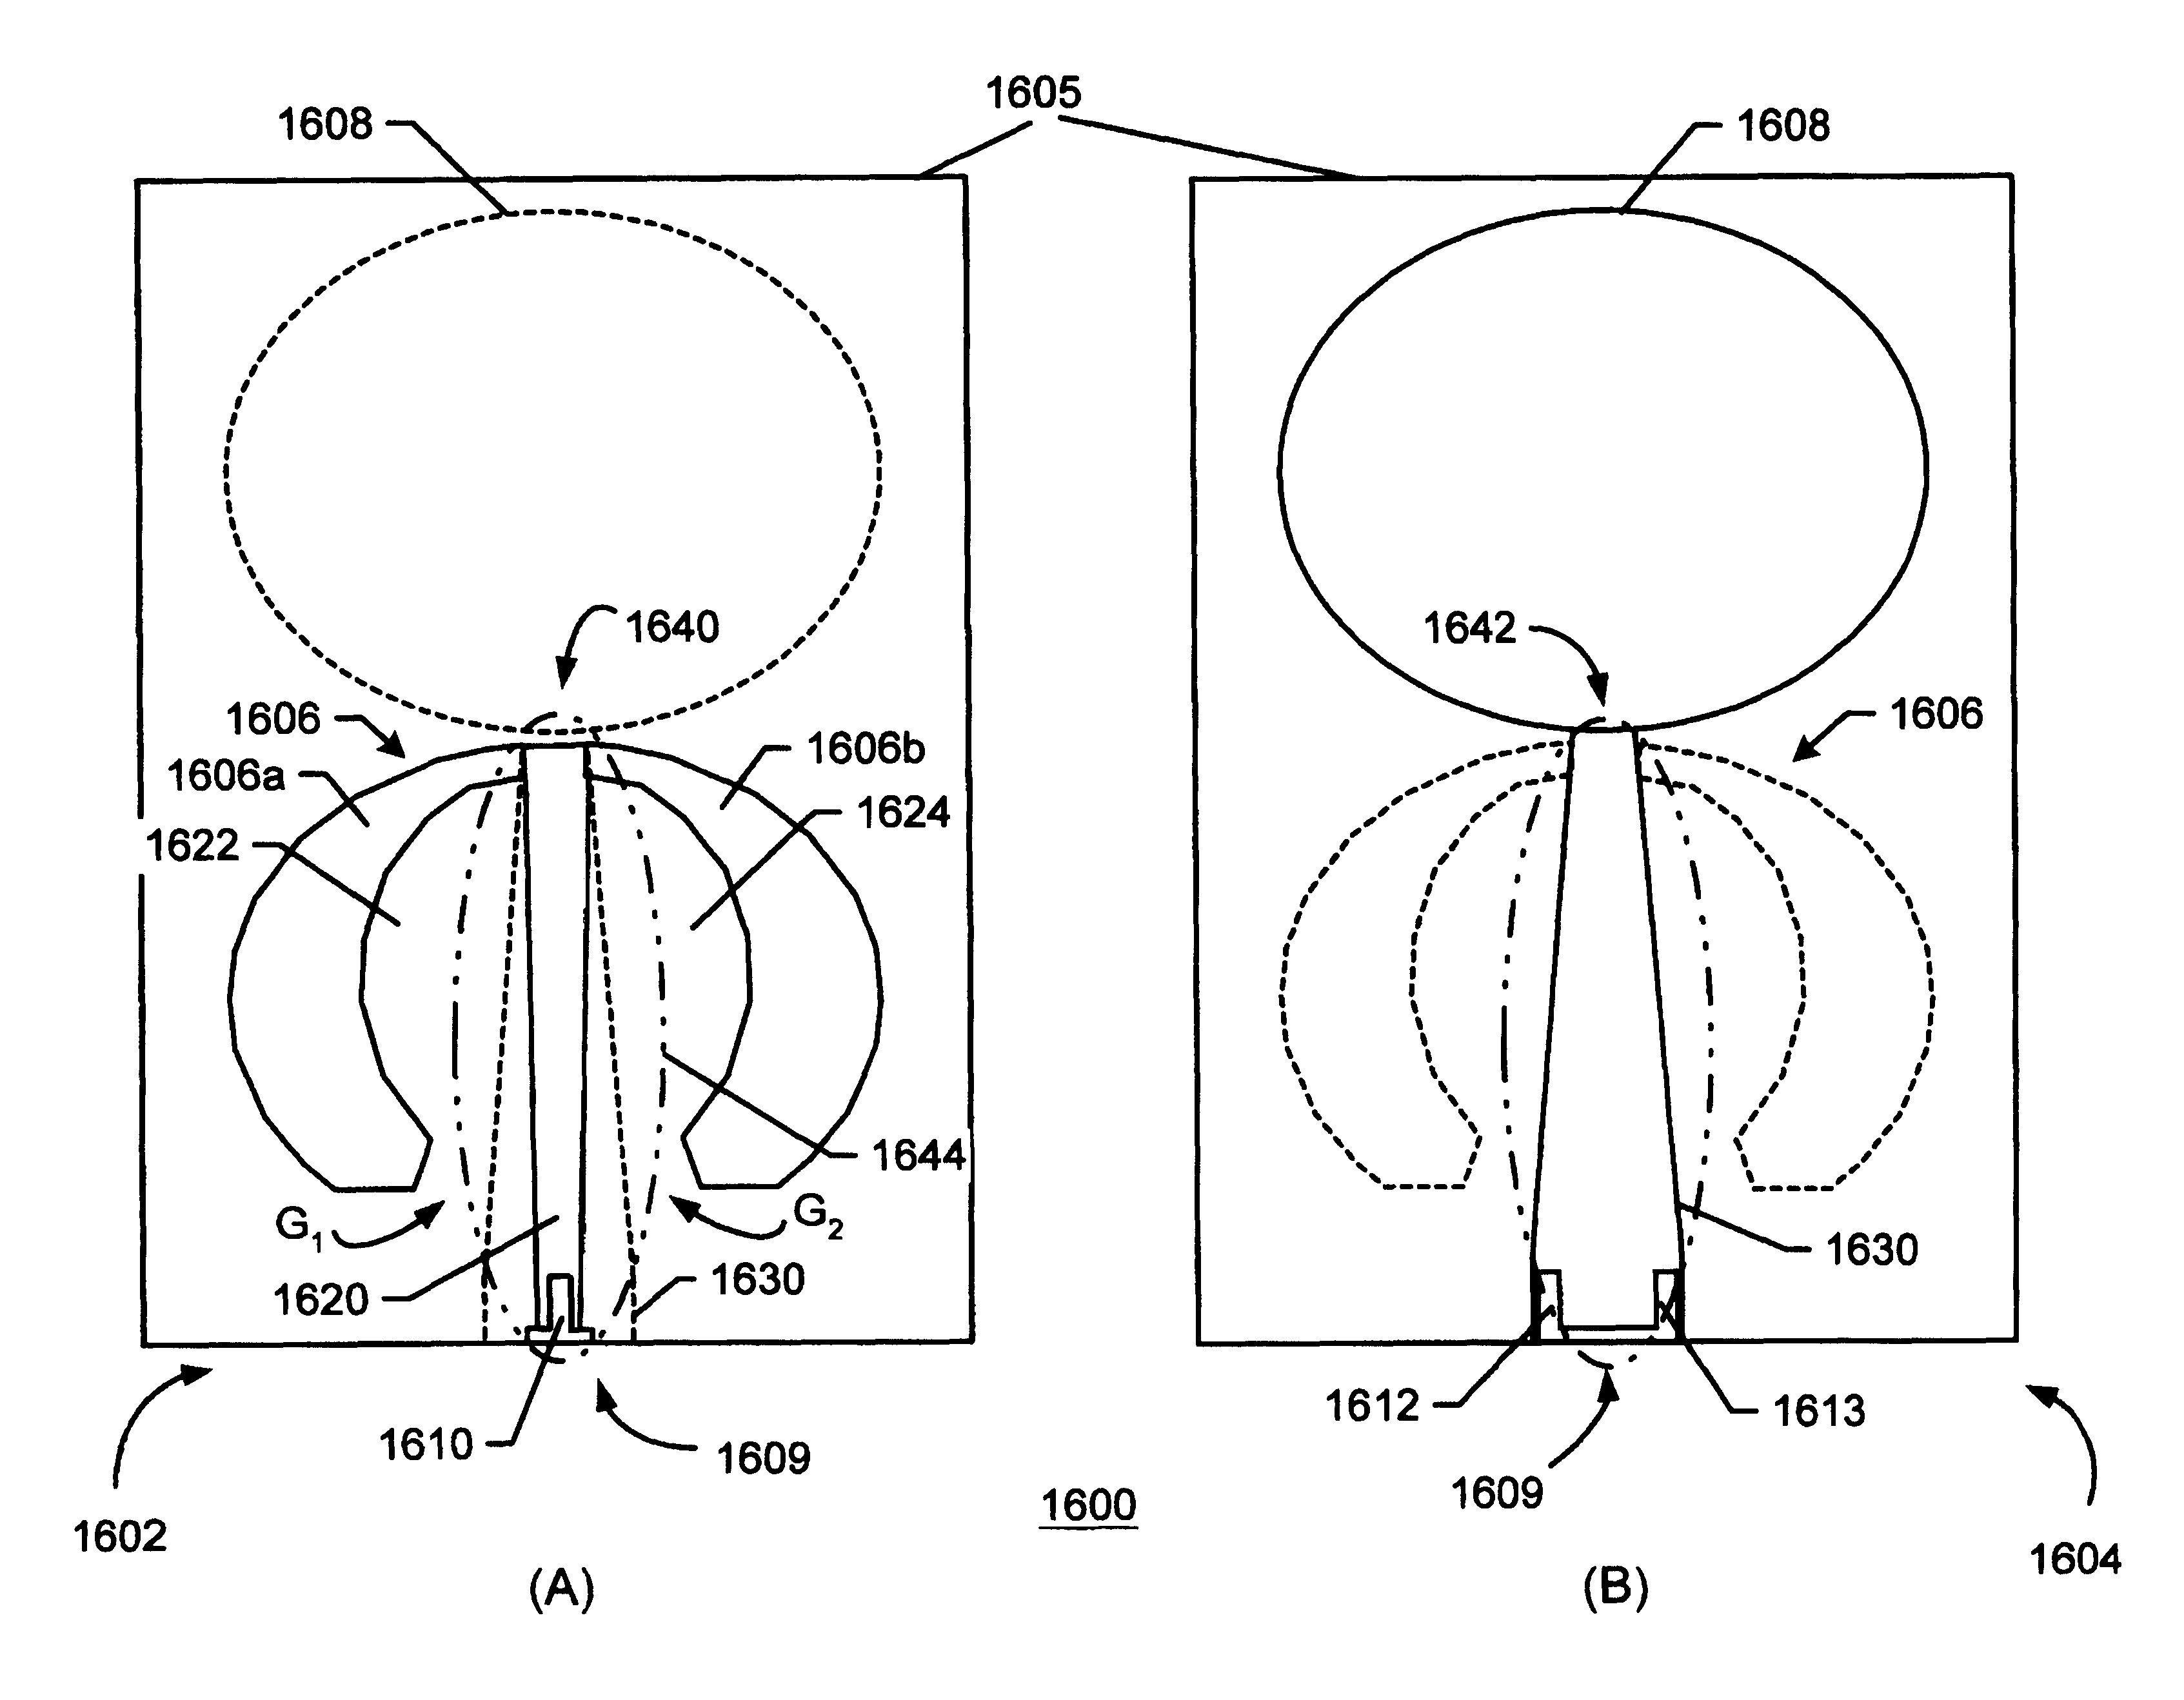 Apparatus for establishing signal coupling between a signal line and an antenna structure